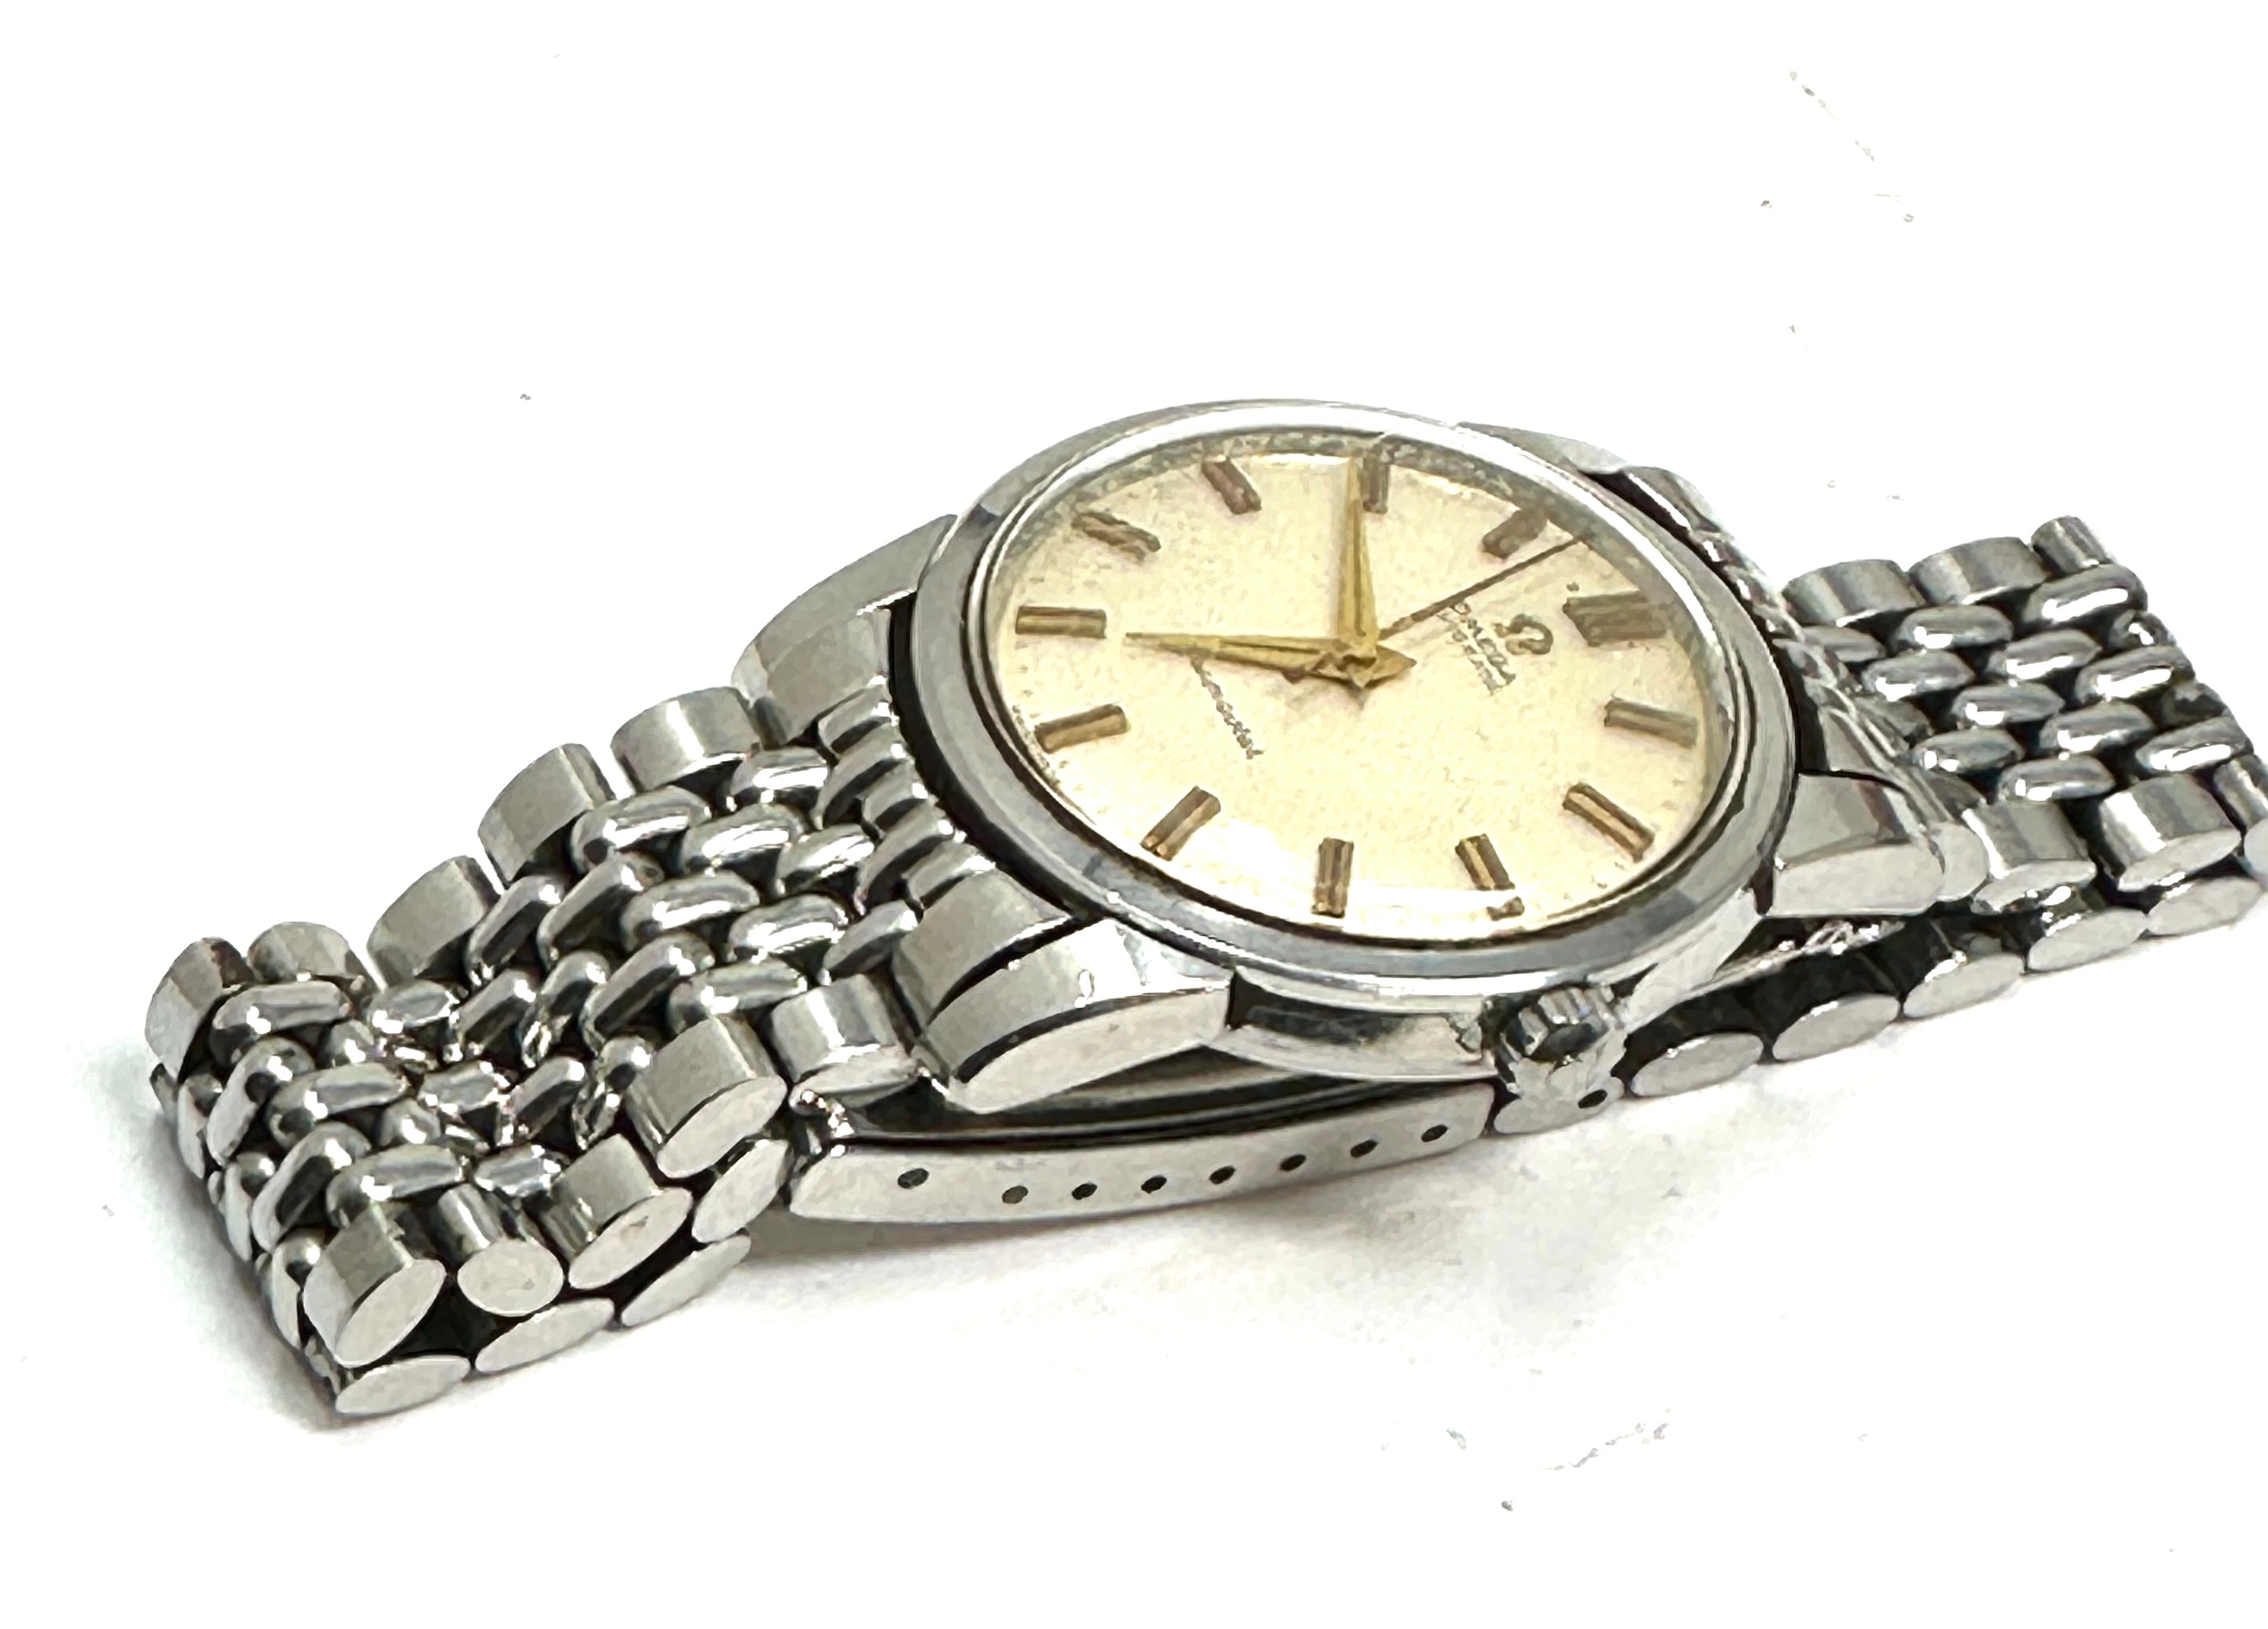 Vintage Gents steel Omega automatic seamaster wrist watch and strap the watch is ticking - Image 2 of 4